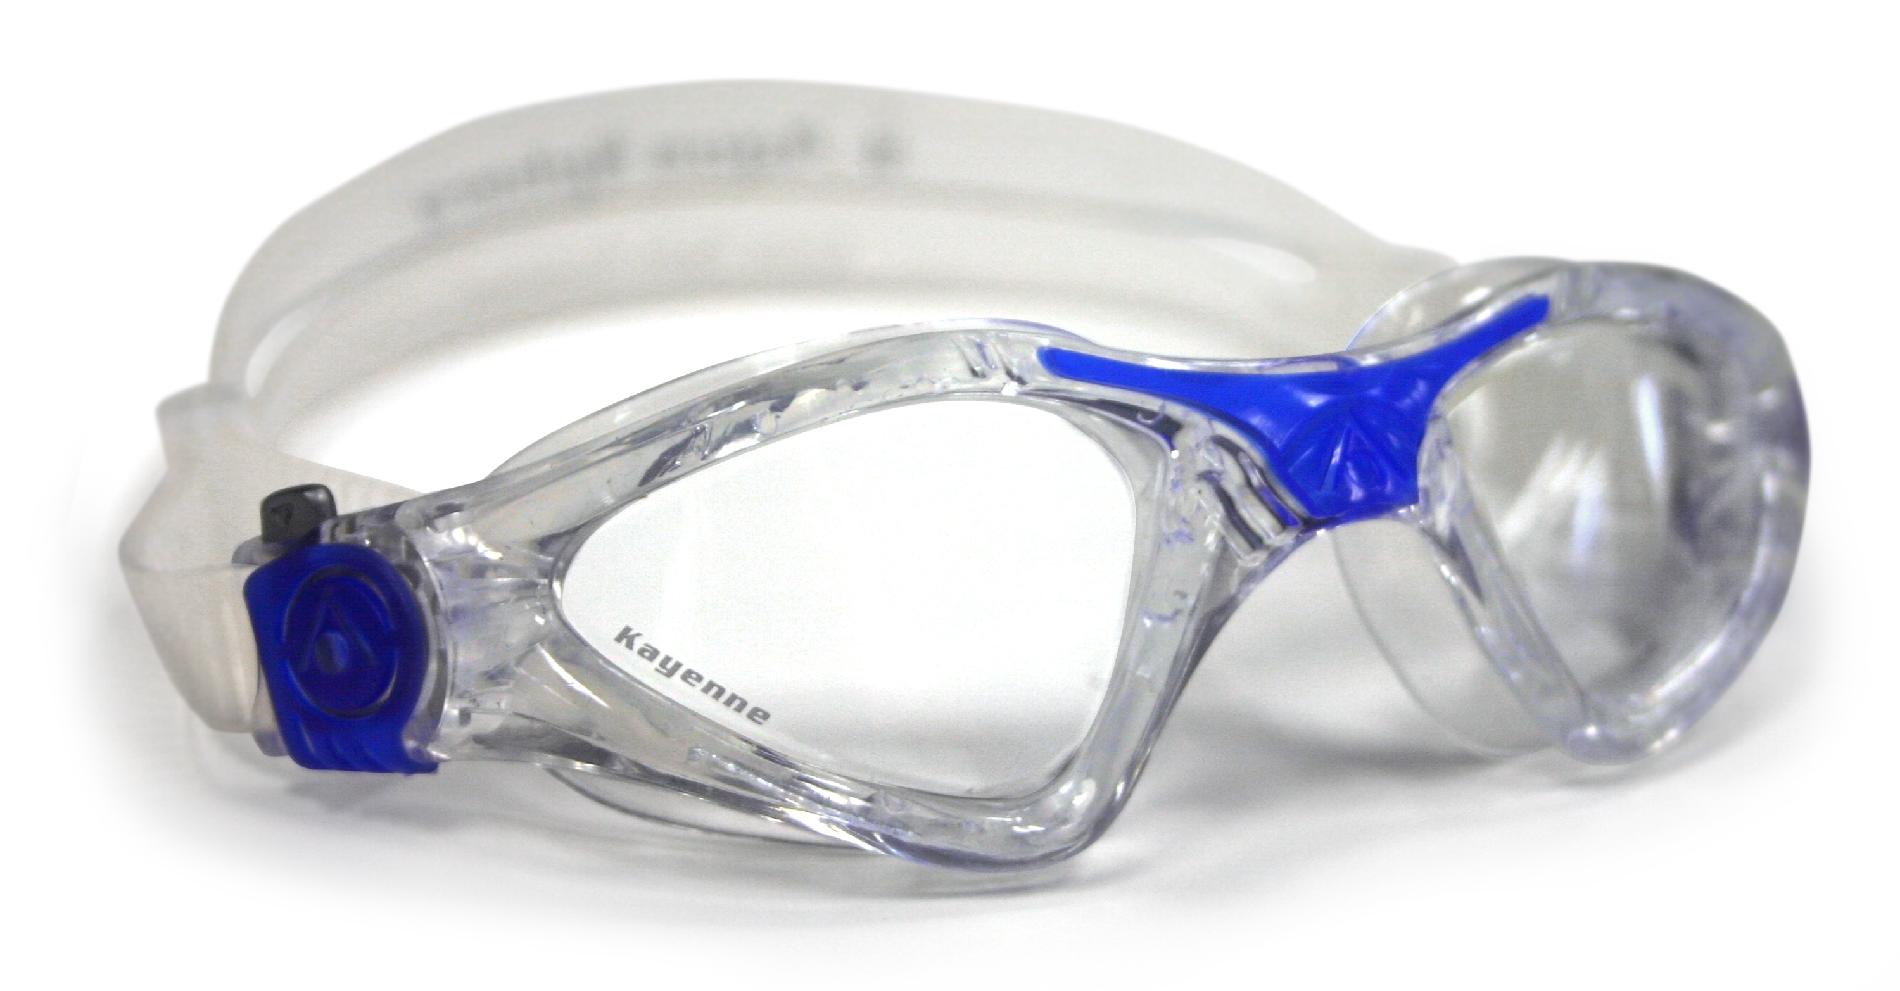 Kayenne Blue Goggle Clear Lens Small